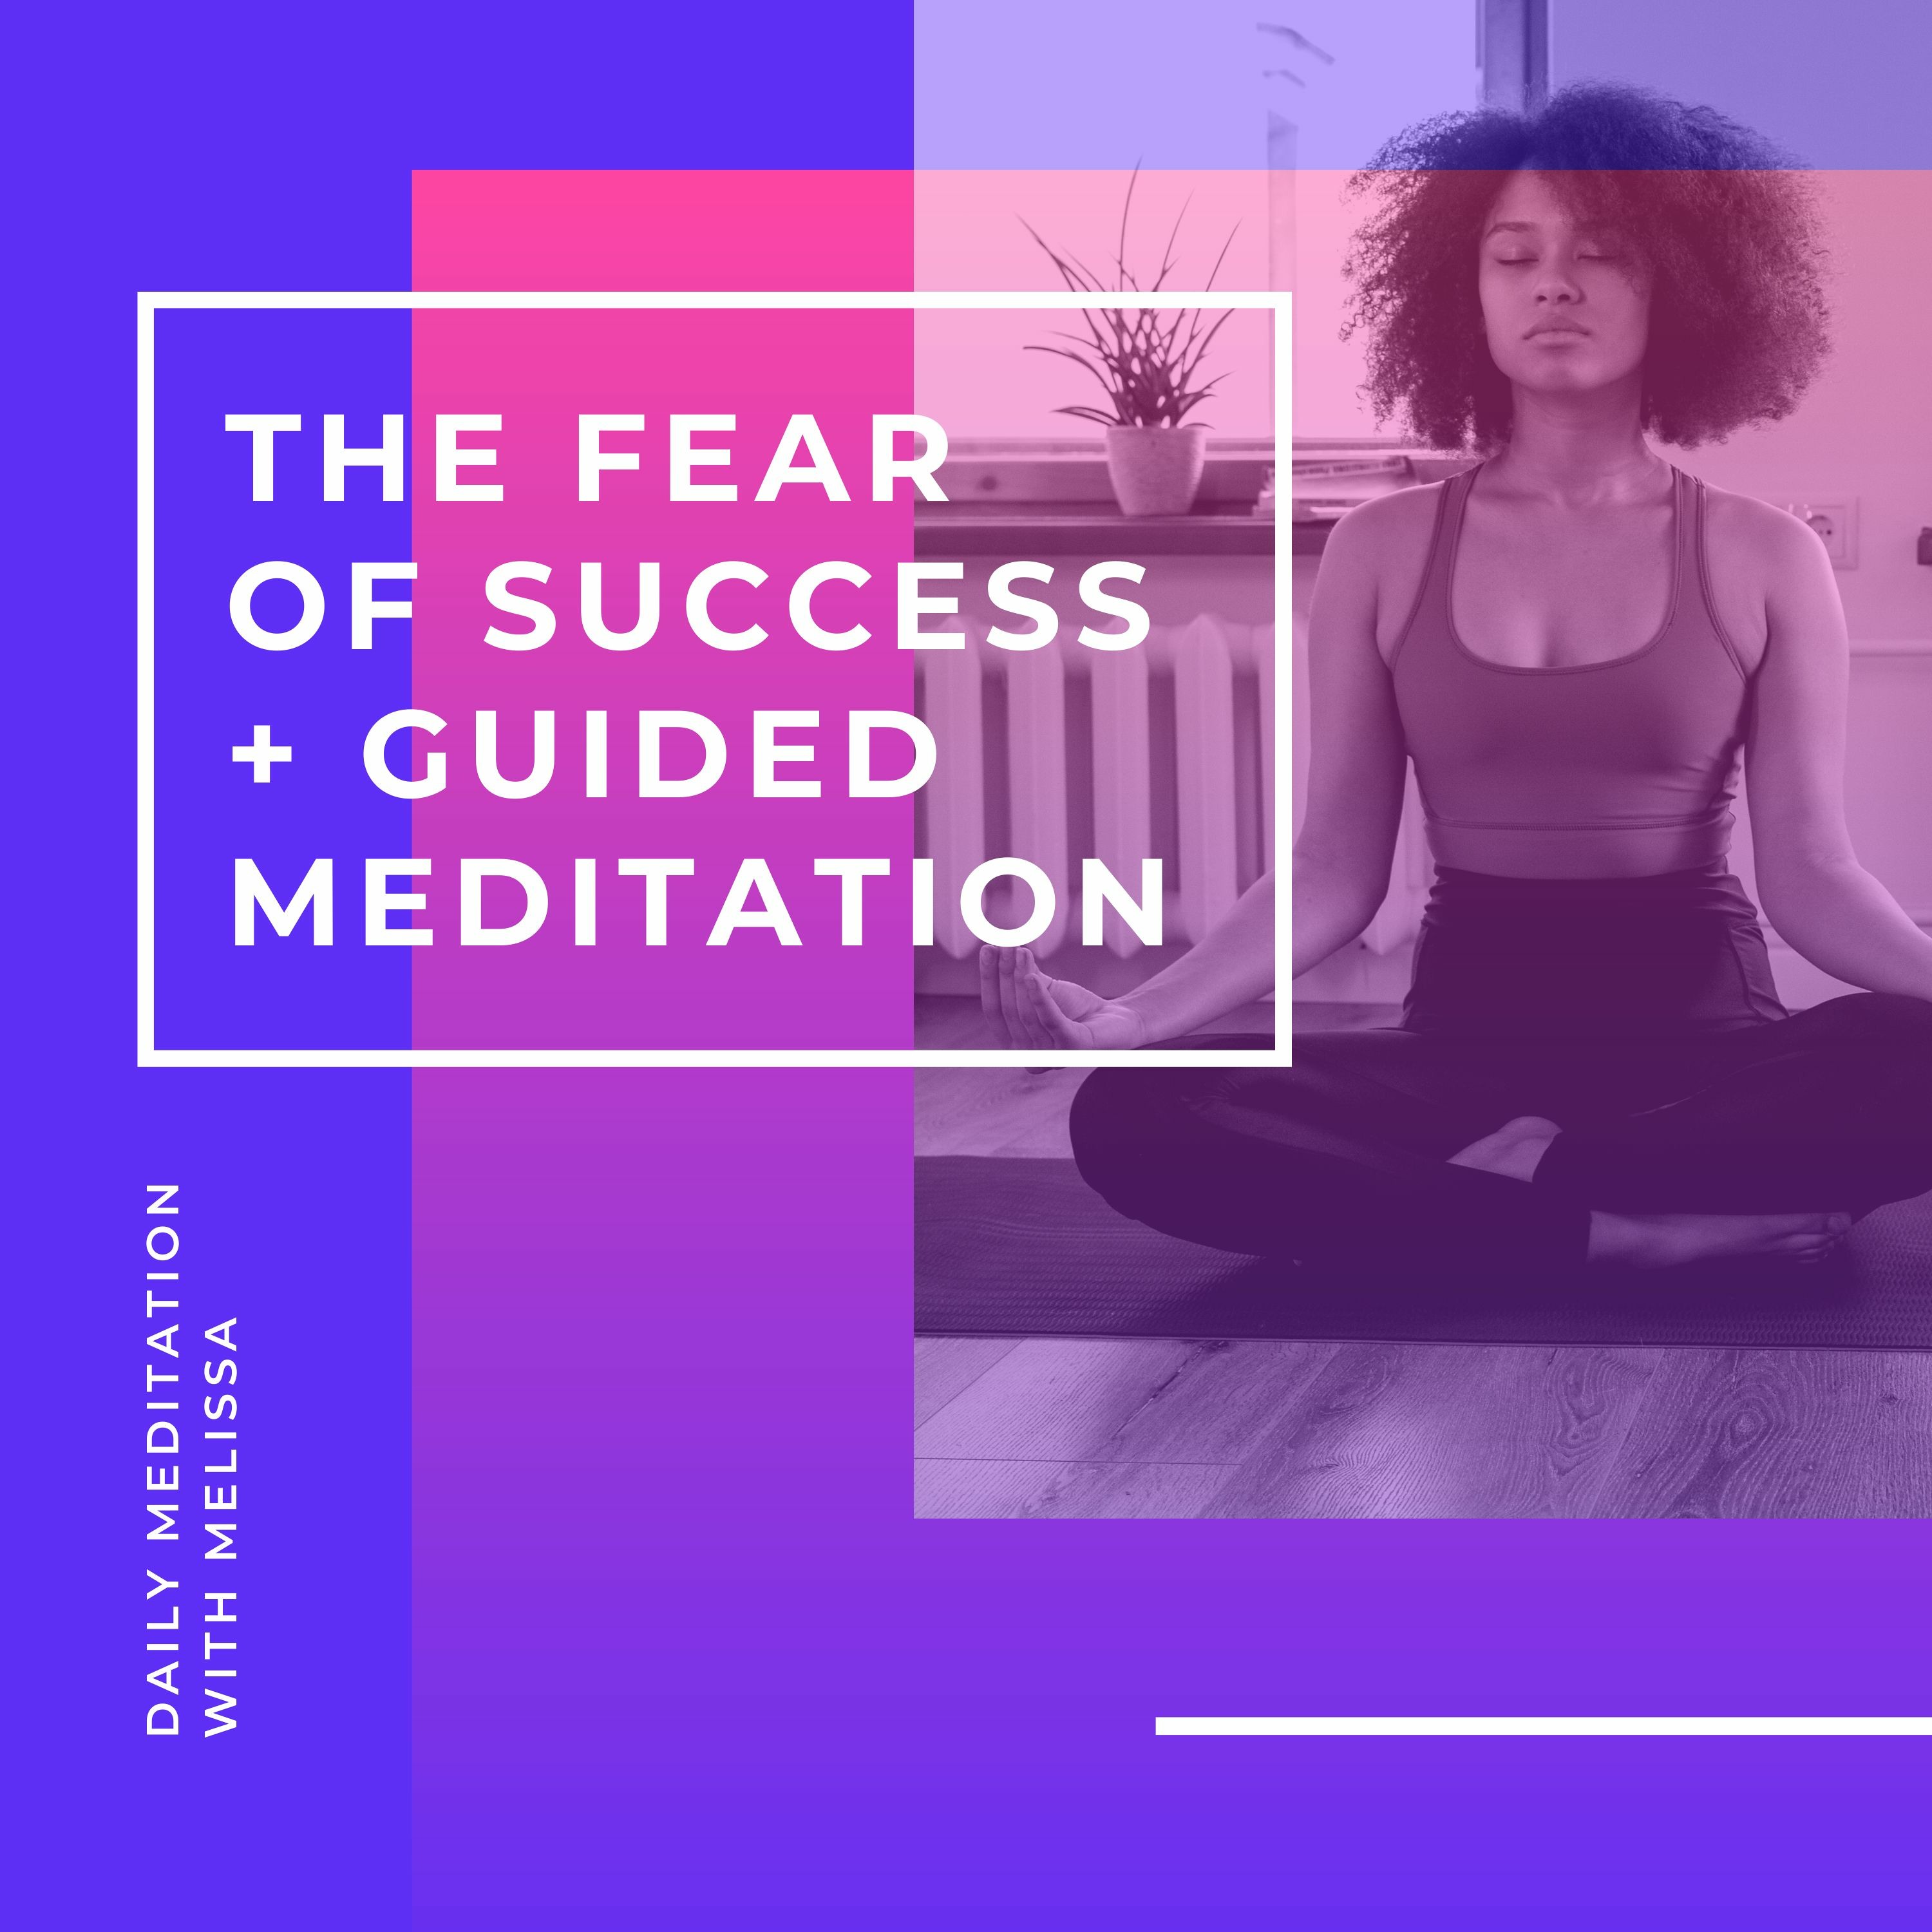 Discussion: The Fear of Success (4 minutes) + Meditation to Overcome It (10 minutes)